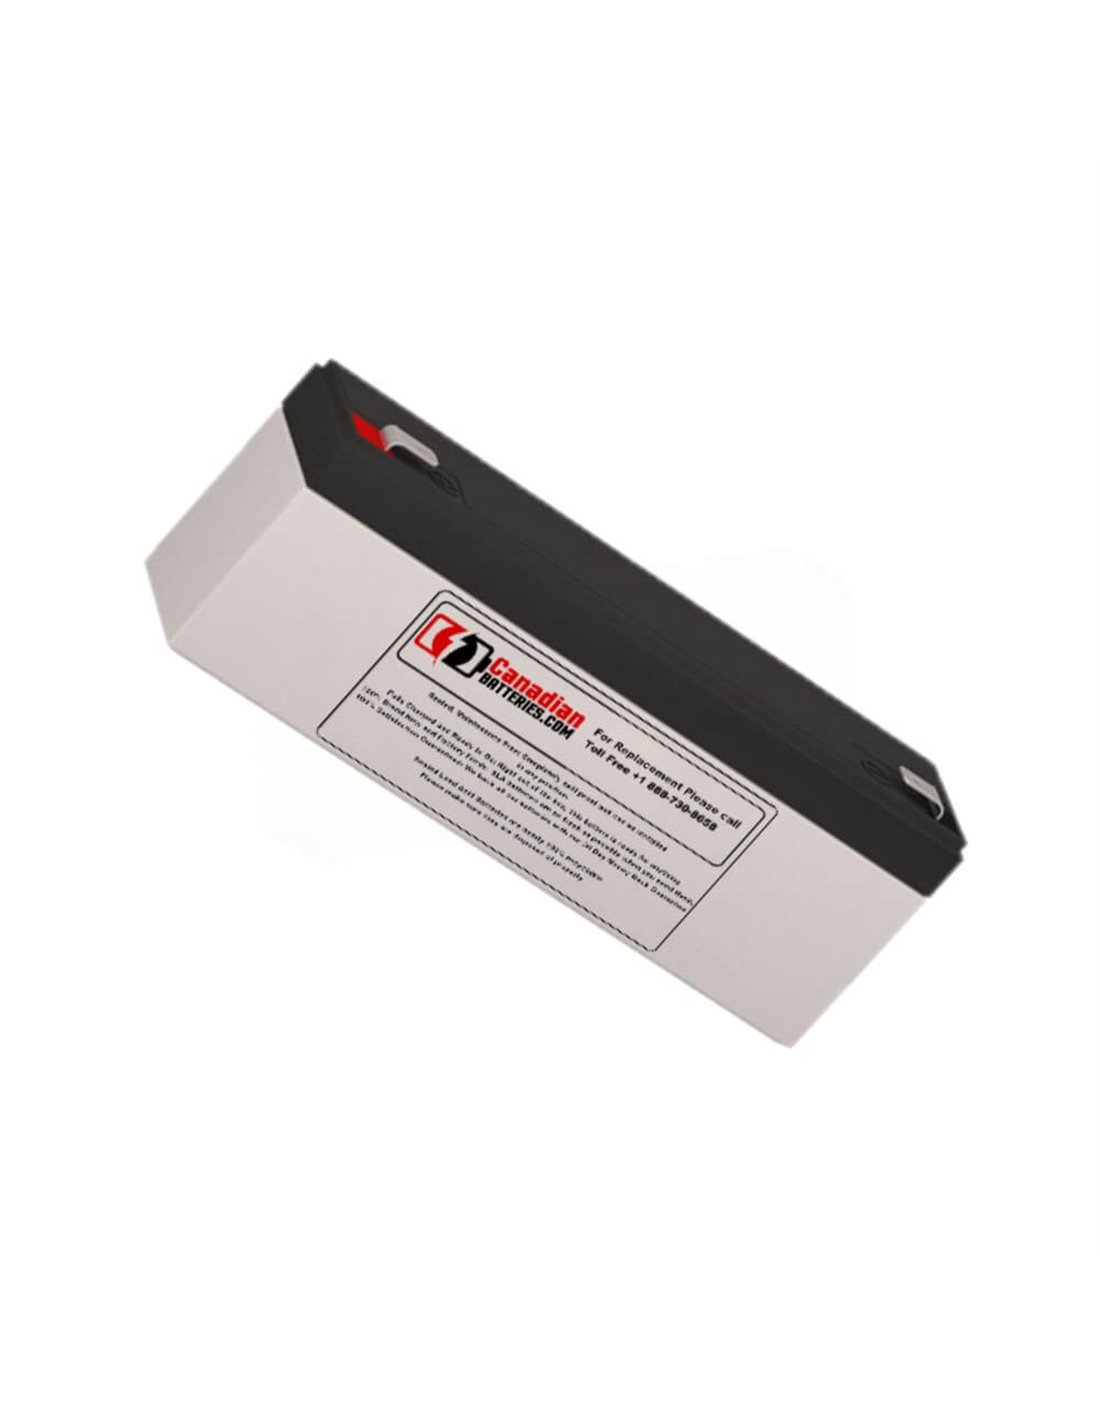 Battery for Intellipower Nd Nt121xl UPS, 1 x 12V, 2.3Ah - 27.6Wh